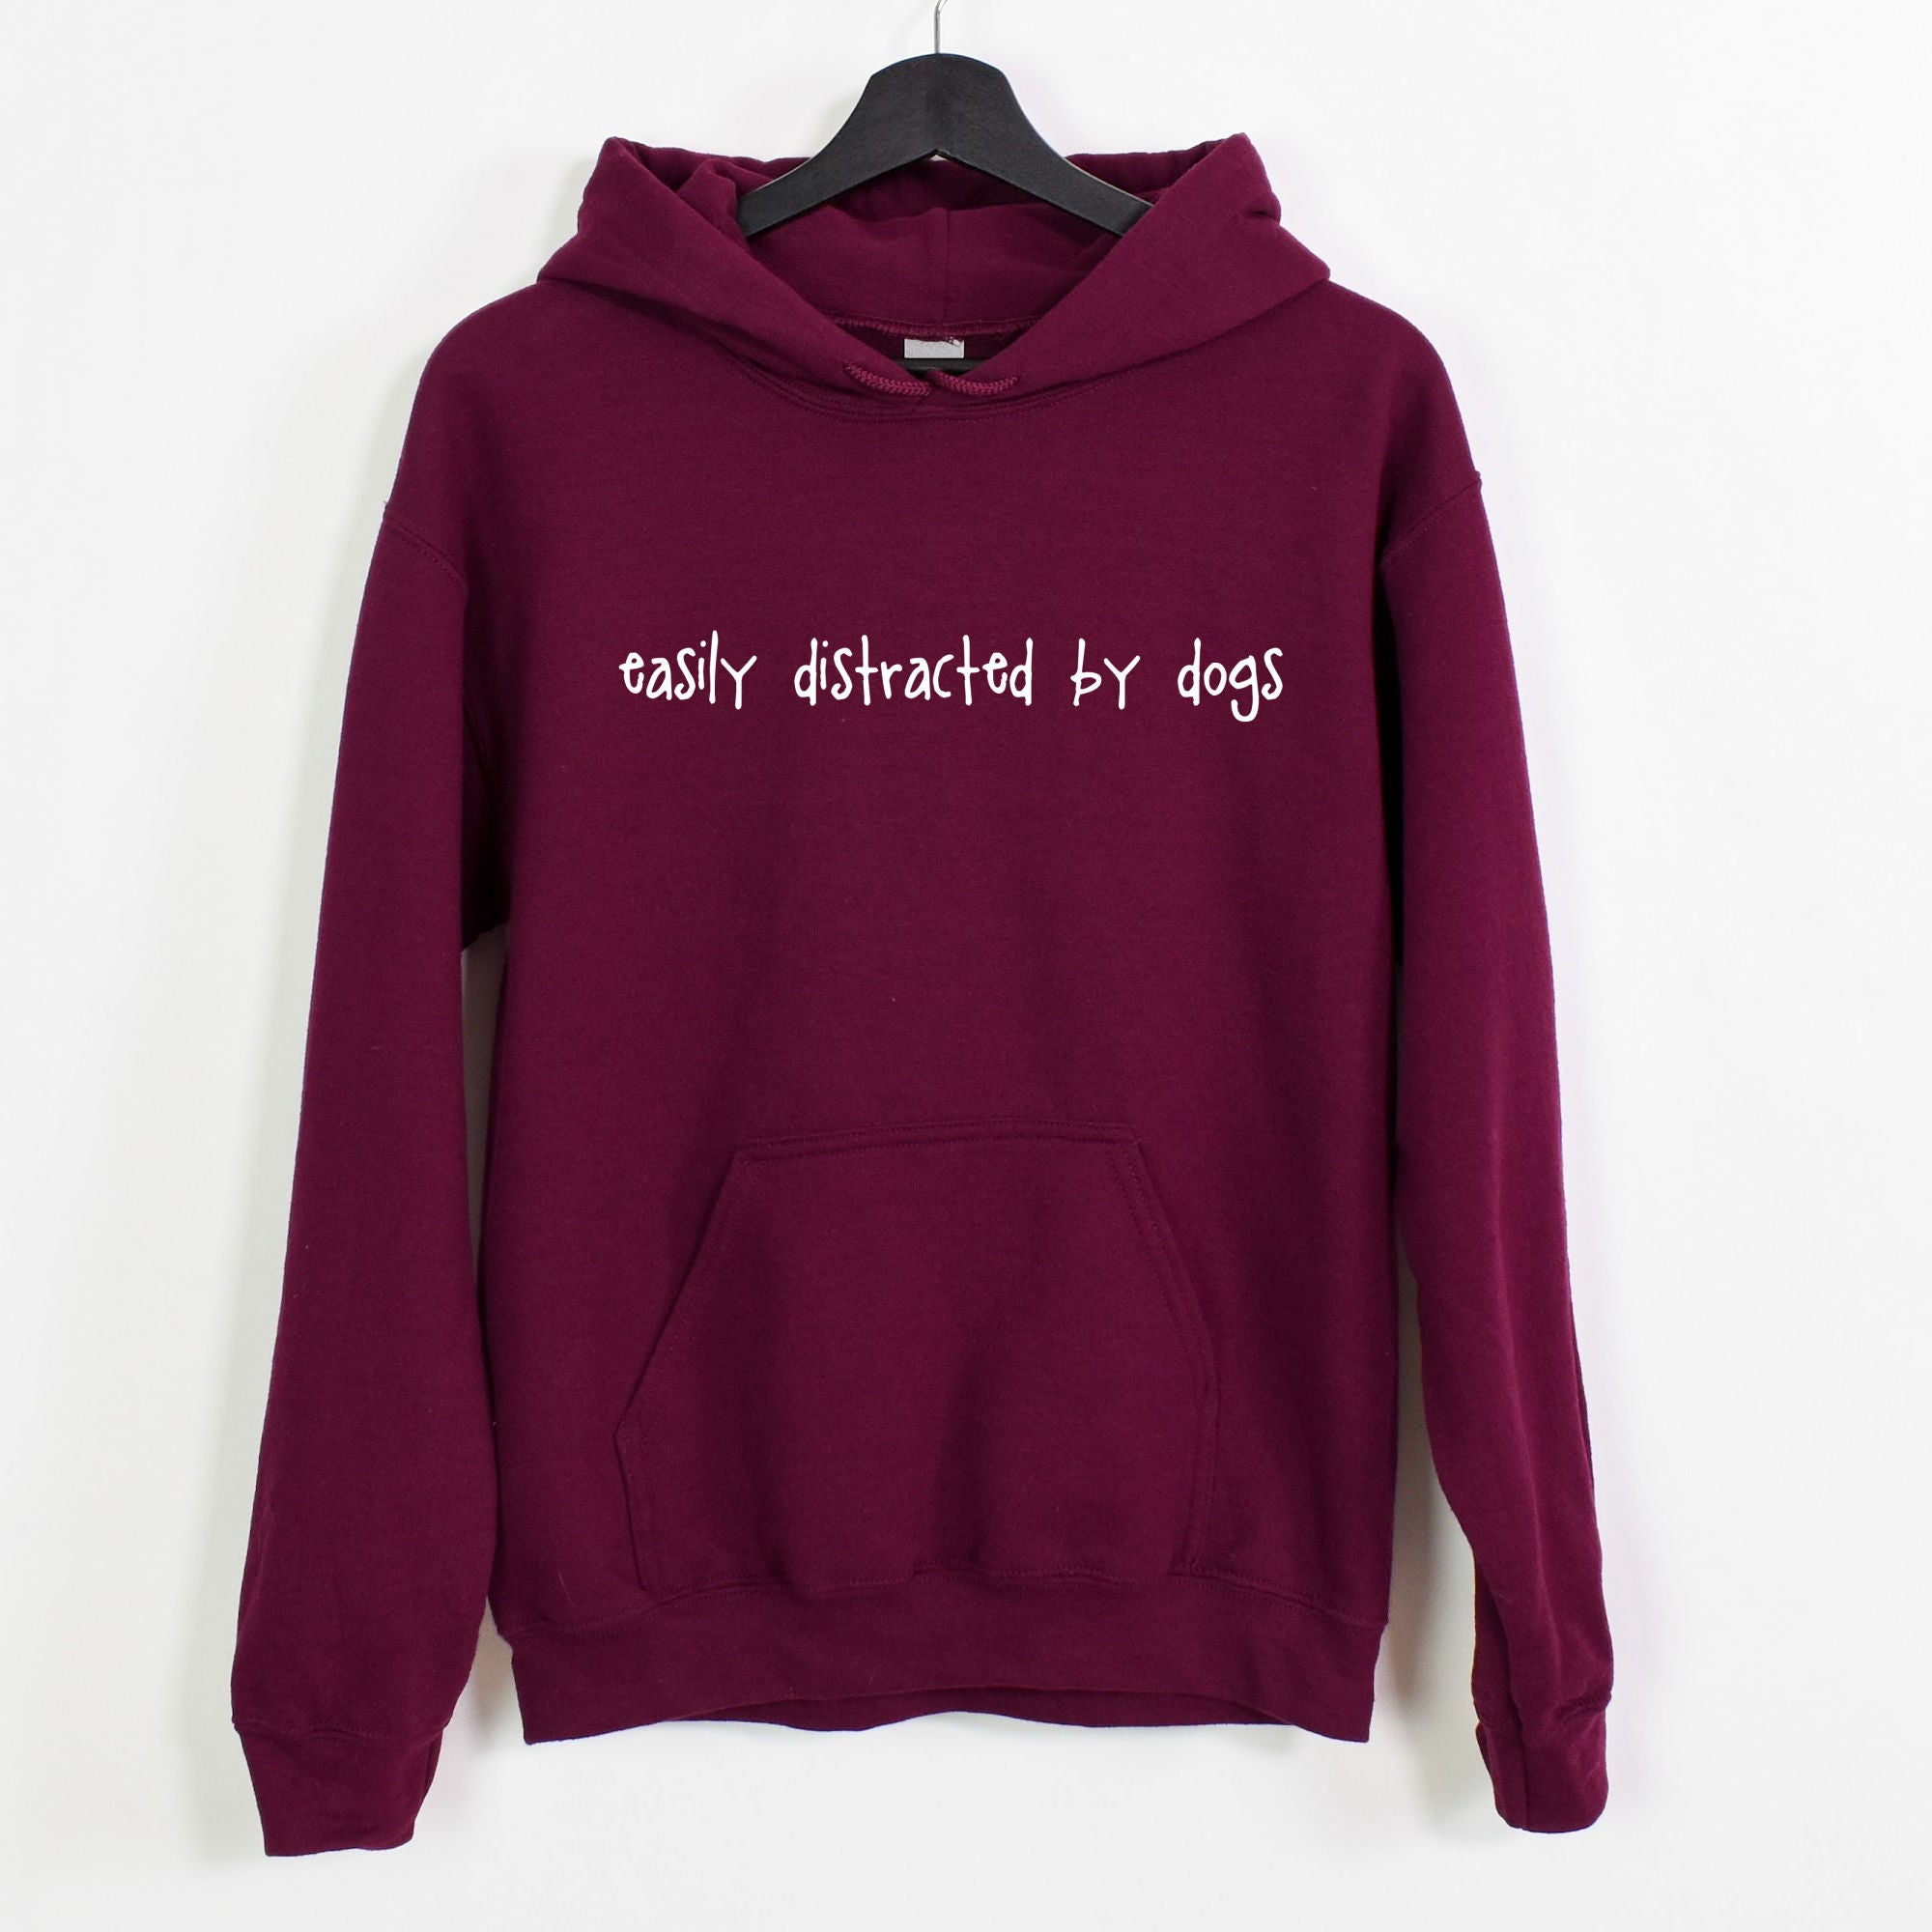 Easily Distracted by Dogs Hoodie - Burgundy Size XS - UK 8-10 (34")